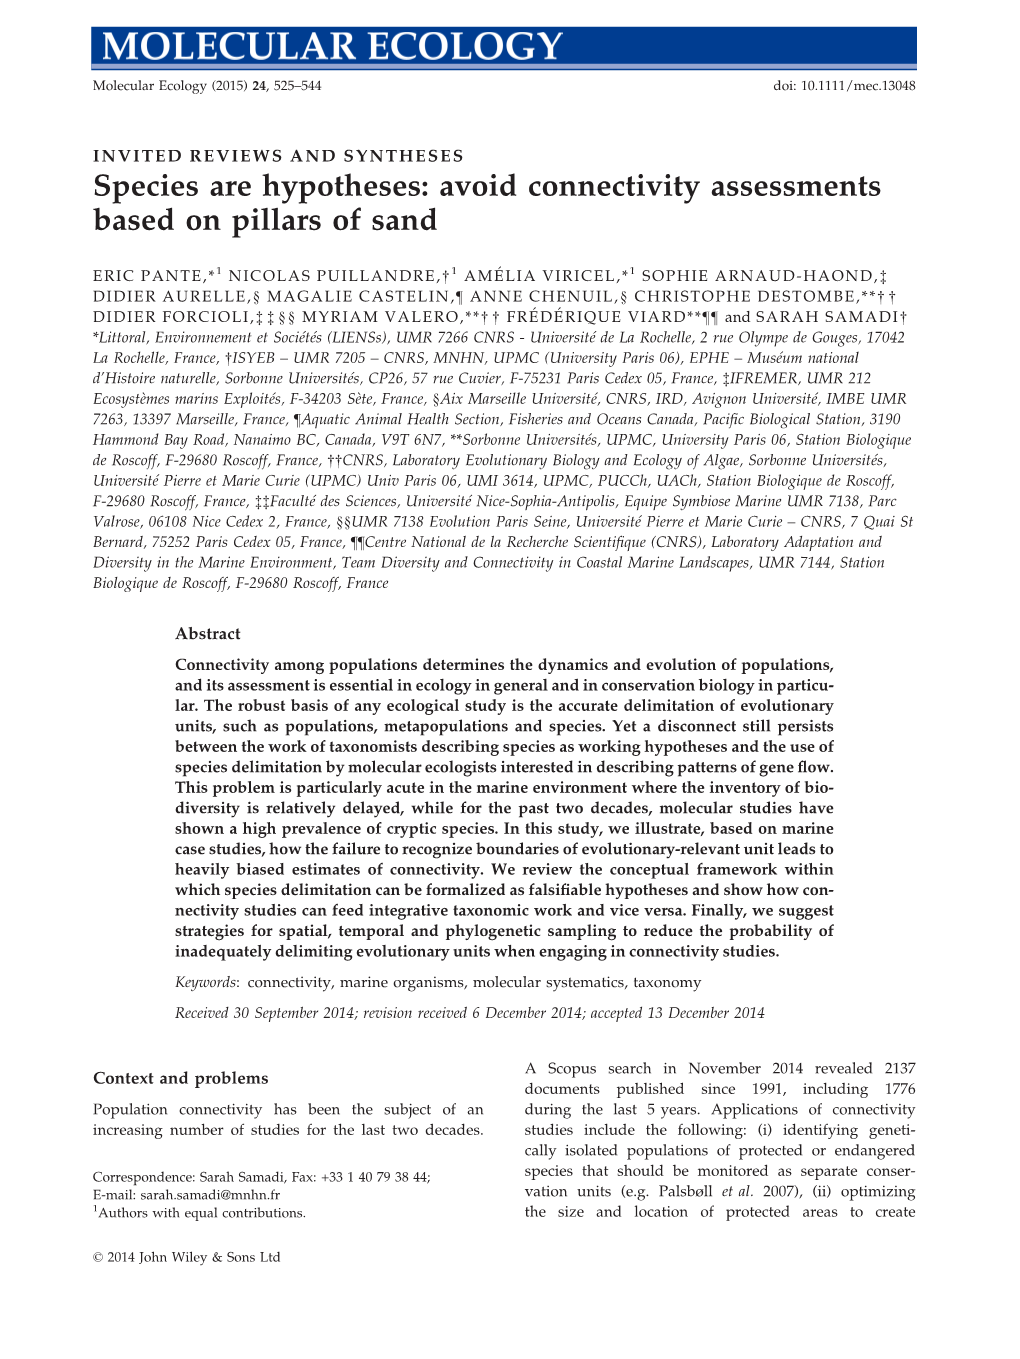 Species Are Hypotheses: Avoid Connectivity Assessments Based on Pillars of Sand